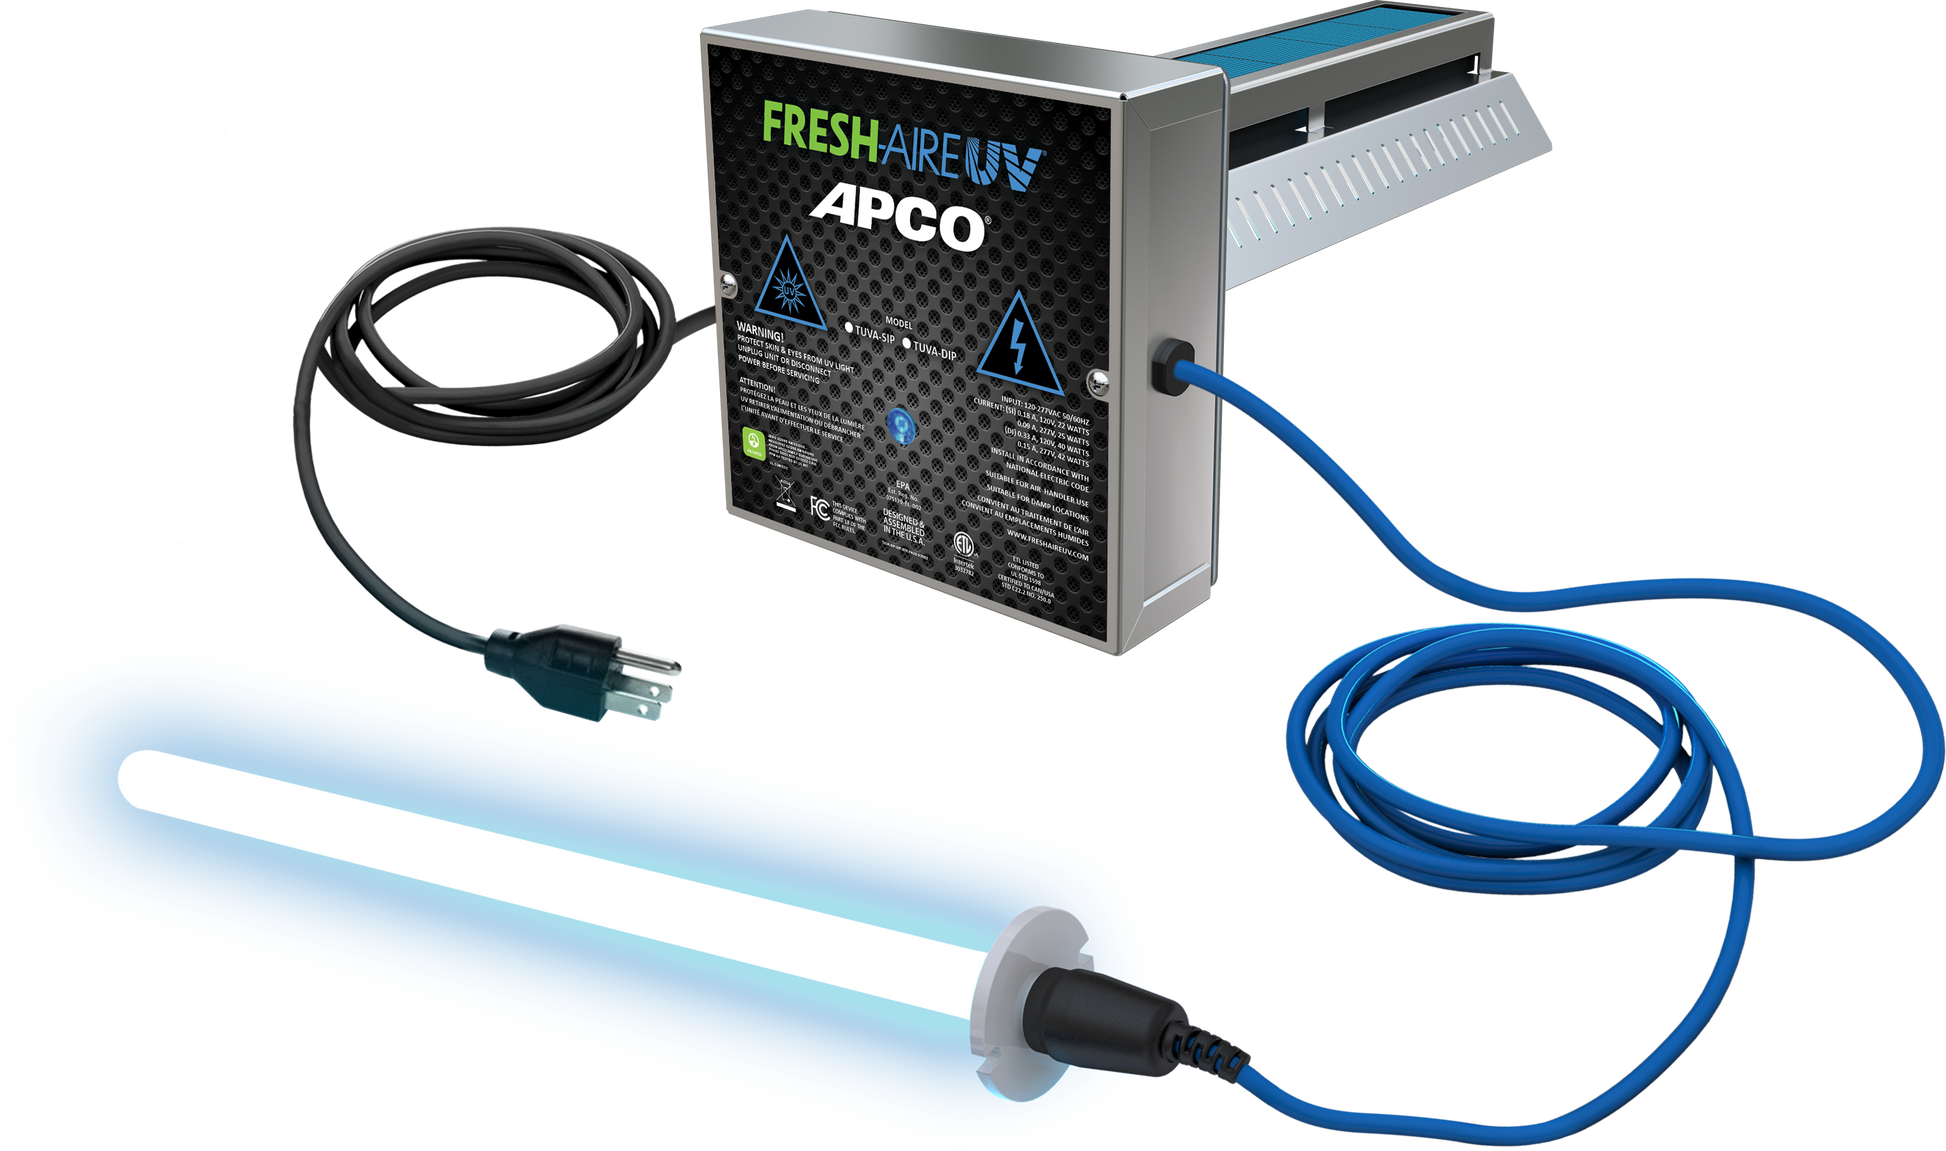 Fresh-Aire TUV-APCO-DI2P - Dual In-Duct Purifier w/Carbon Matrix & 2nd lamp with 120V Plug